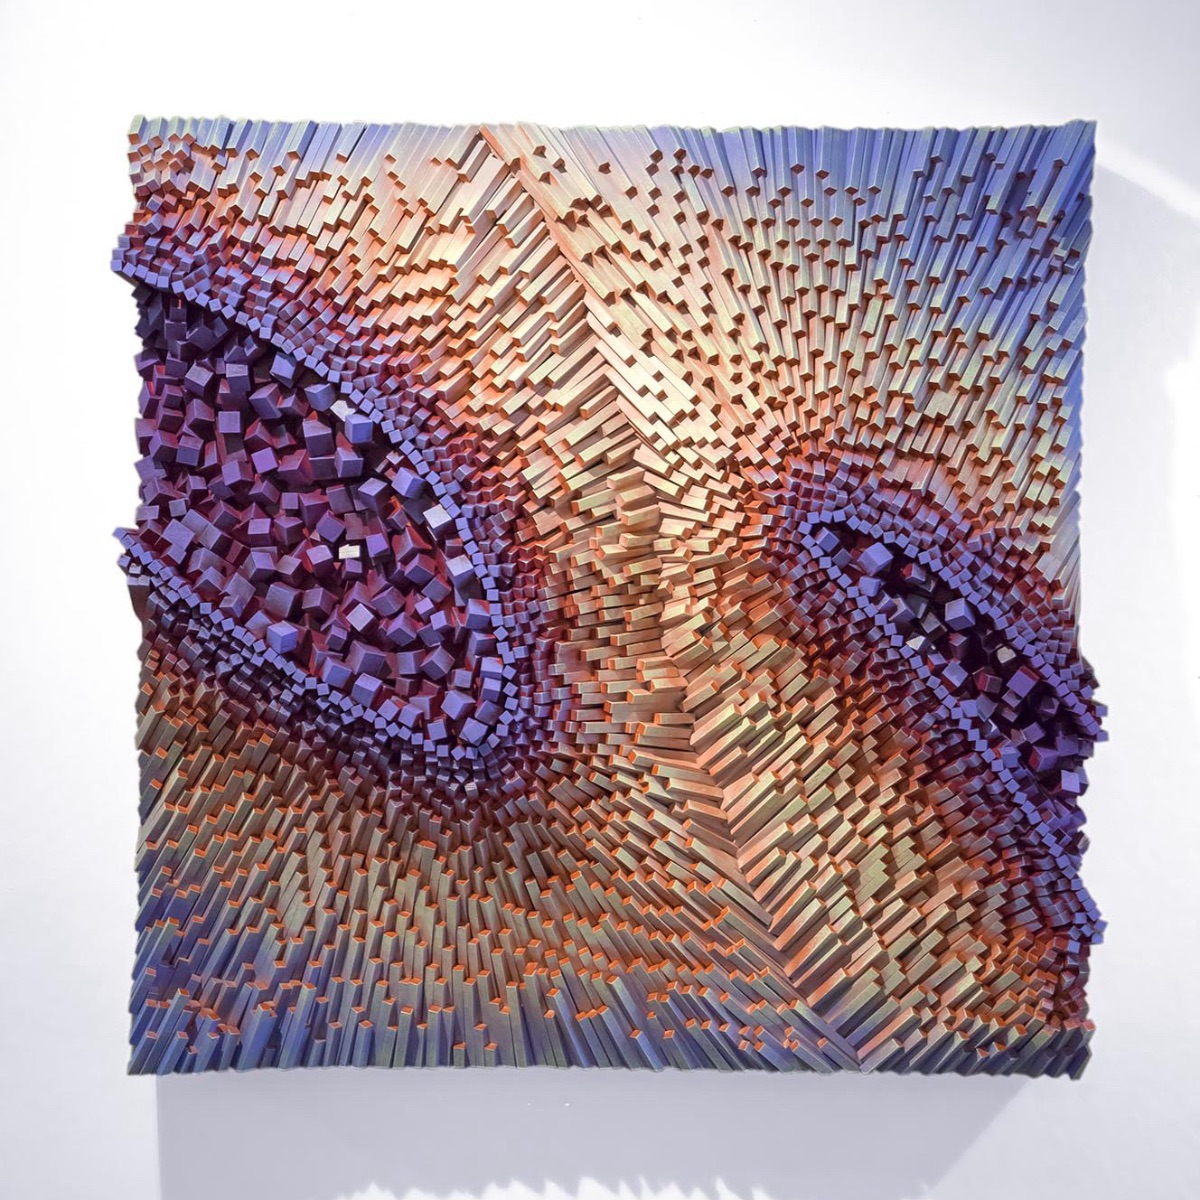 Gil Bruvel, <em>Bending the Lines #16</em>, wood, resin, and acrylic, 48 x 48 x 9 in. 